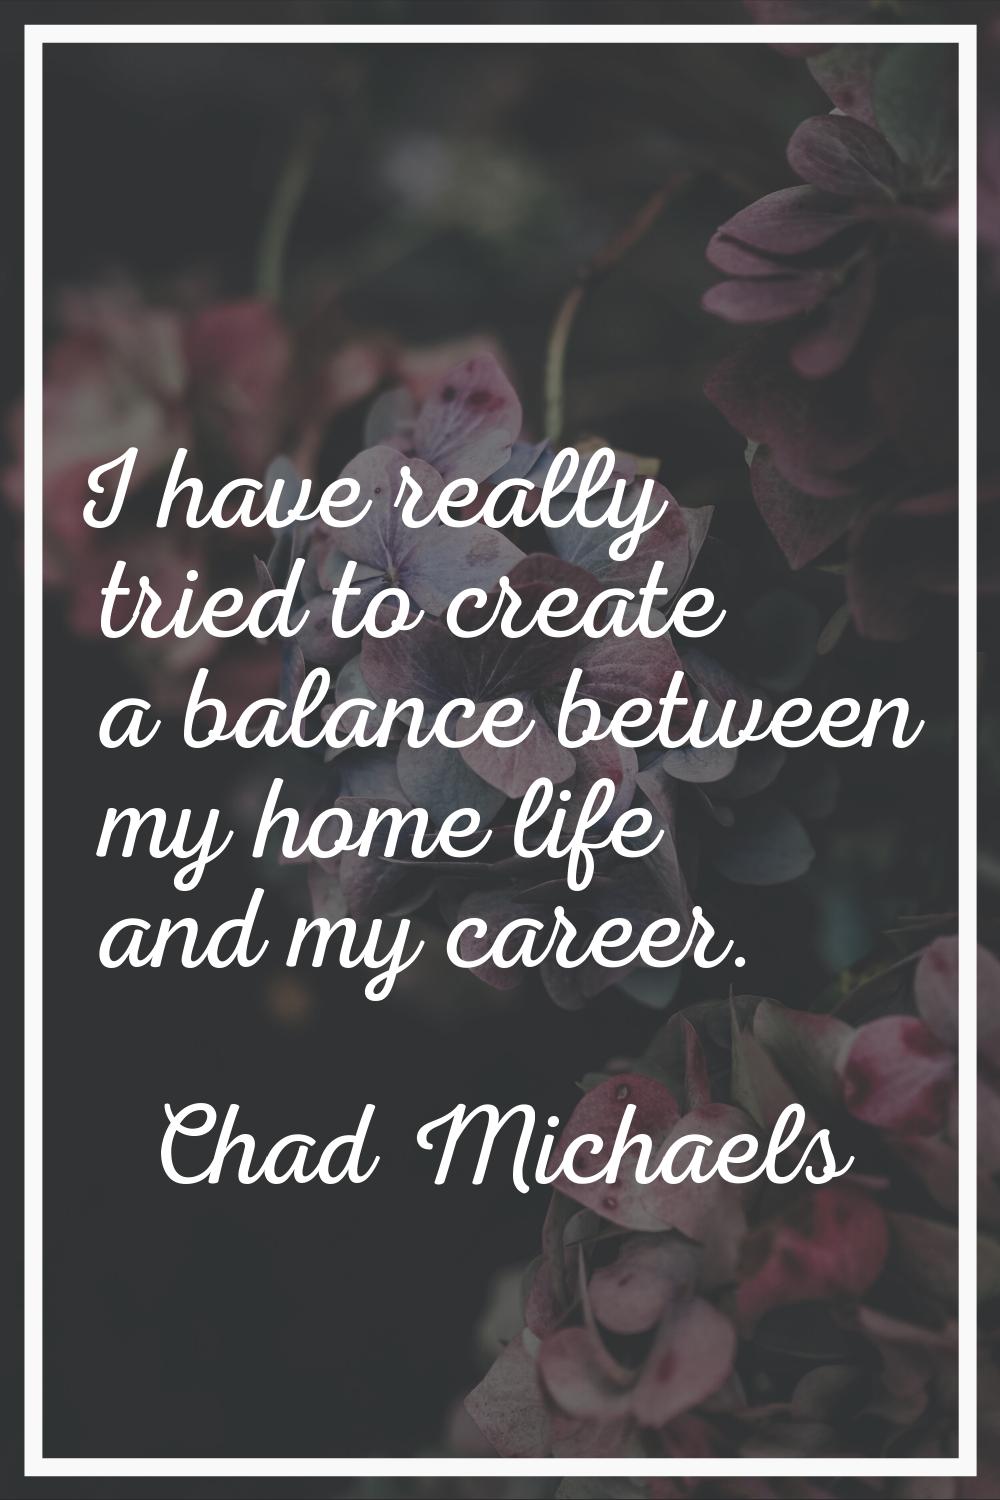 I have really tried to create a balance between my home life and my career.